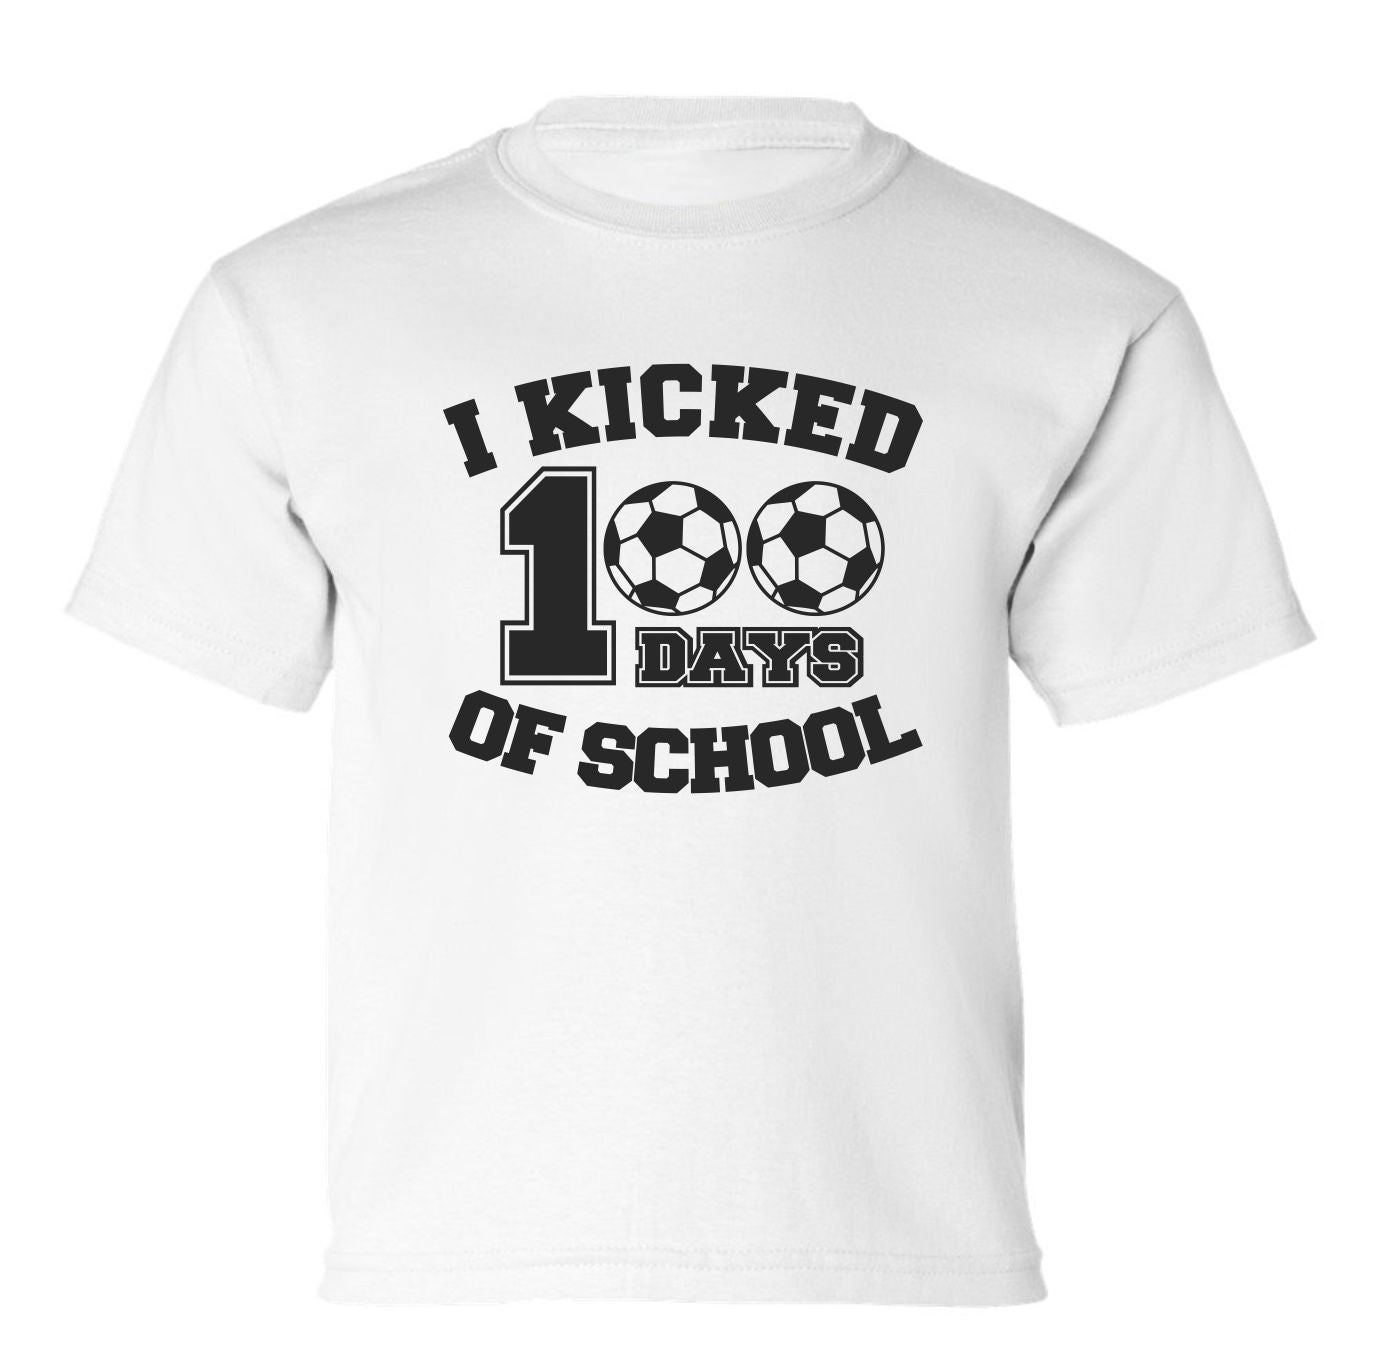 "I Kicked 100 Days Of School" Toddler/Youth T-Shirt